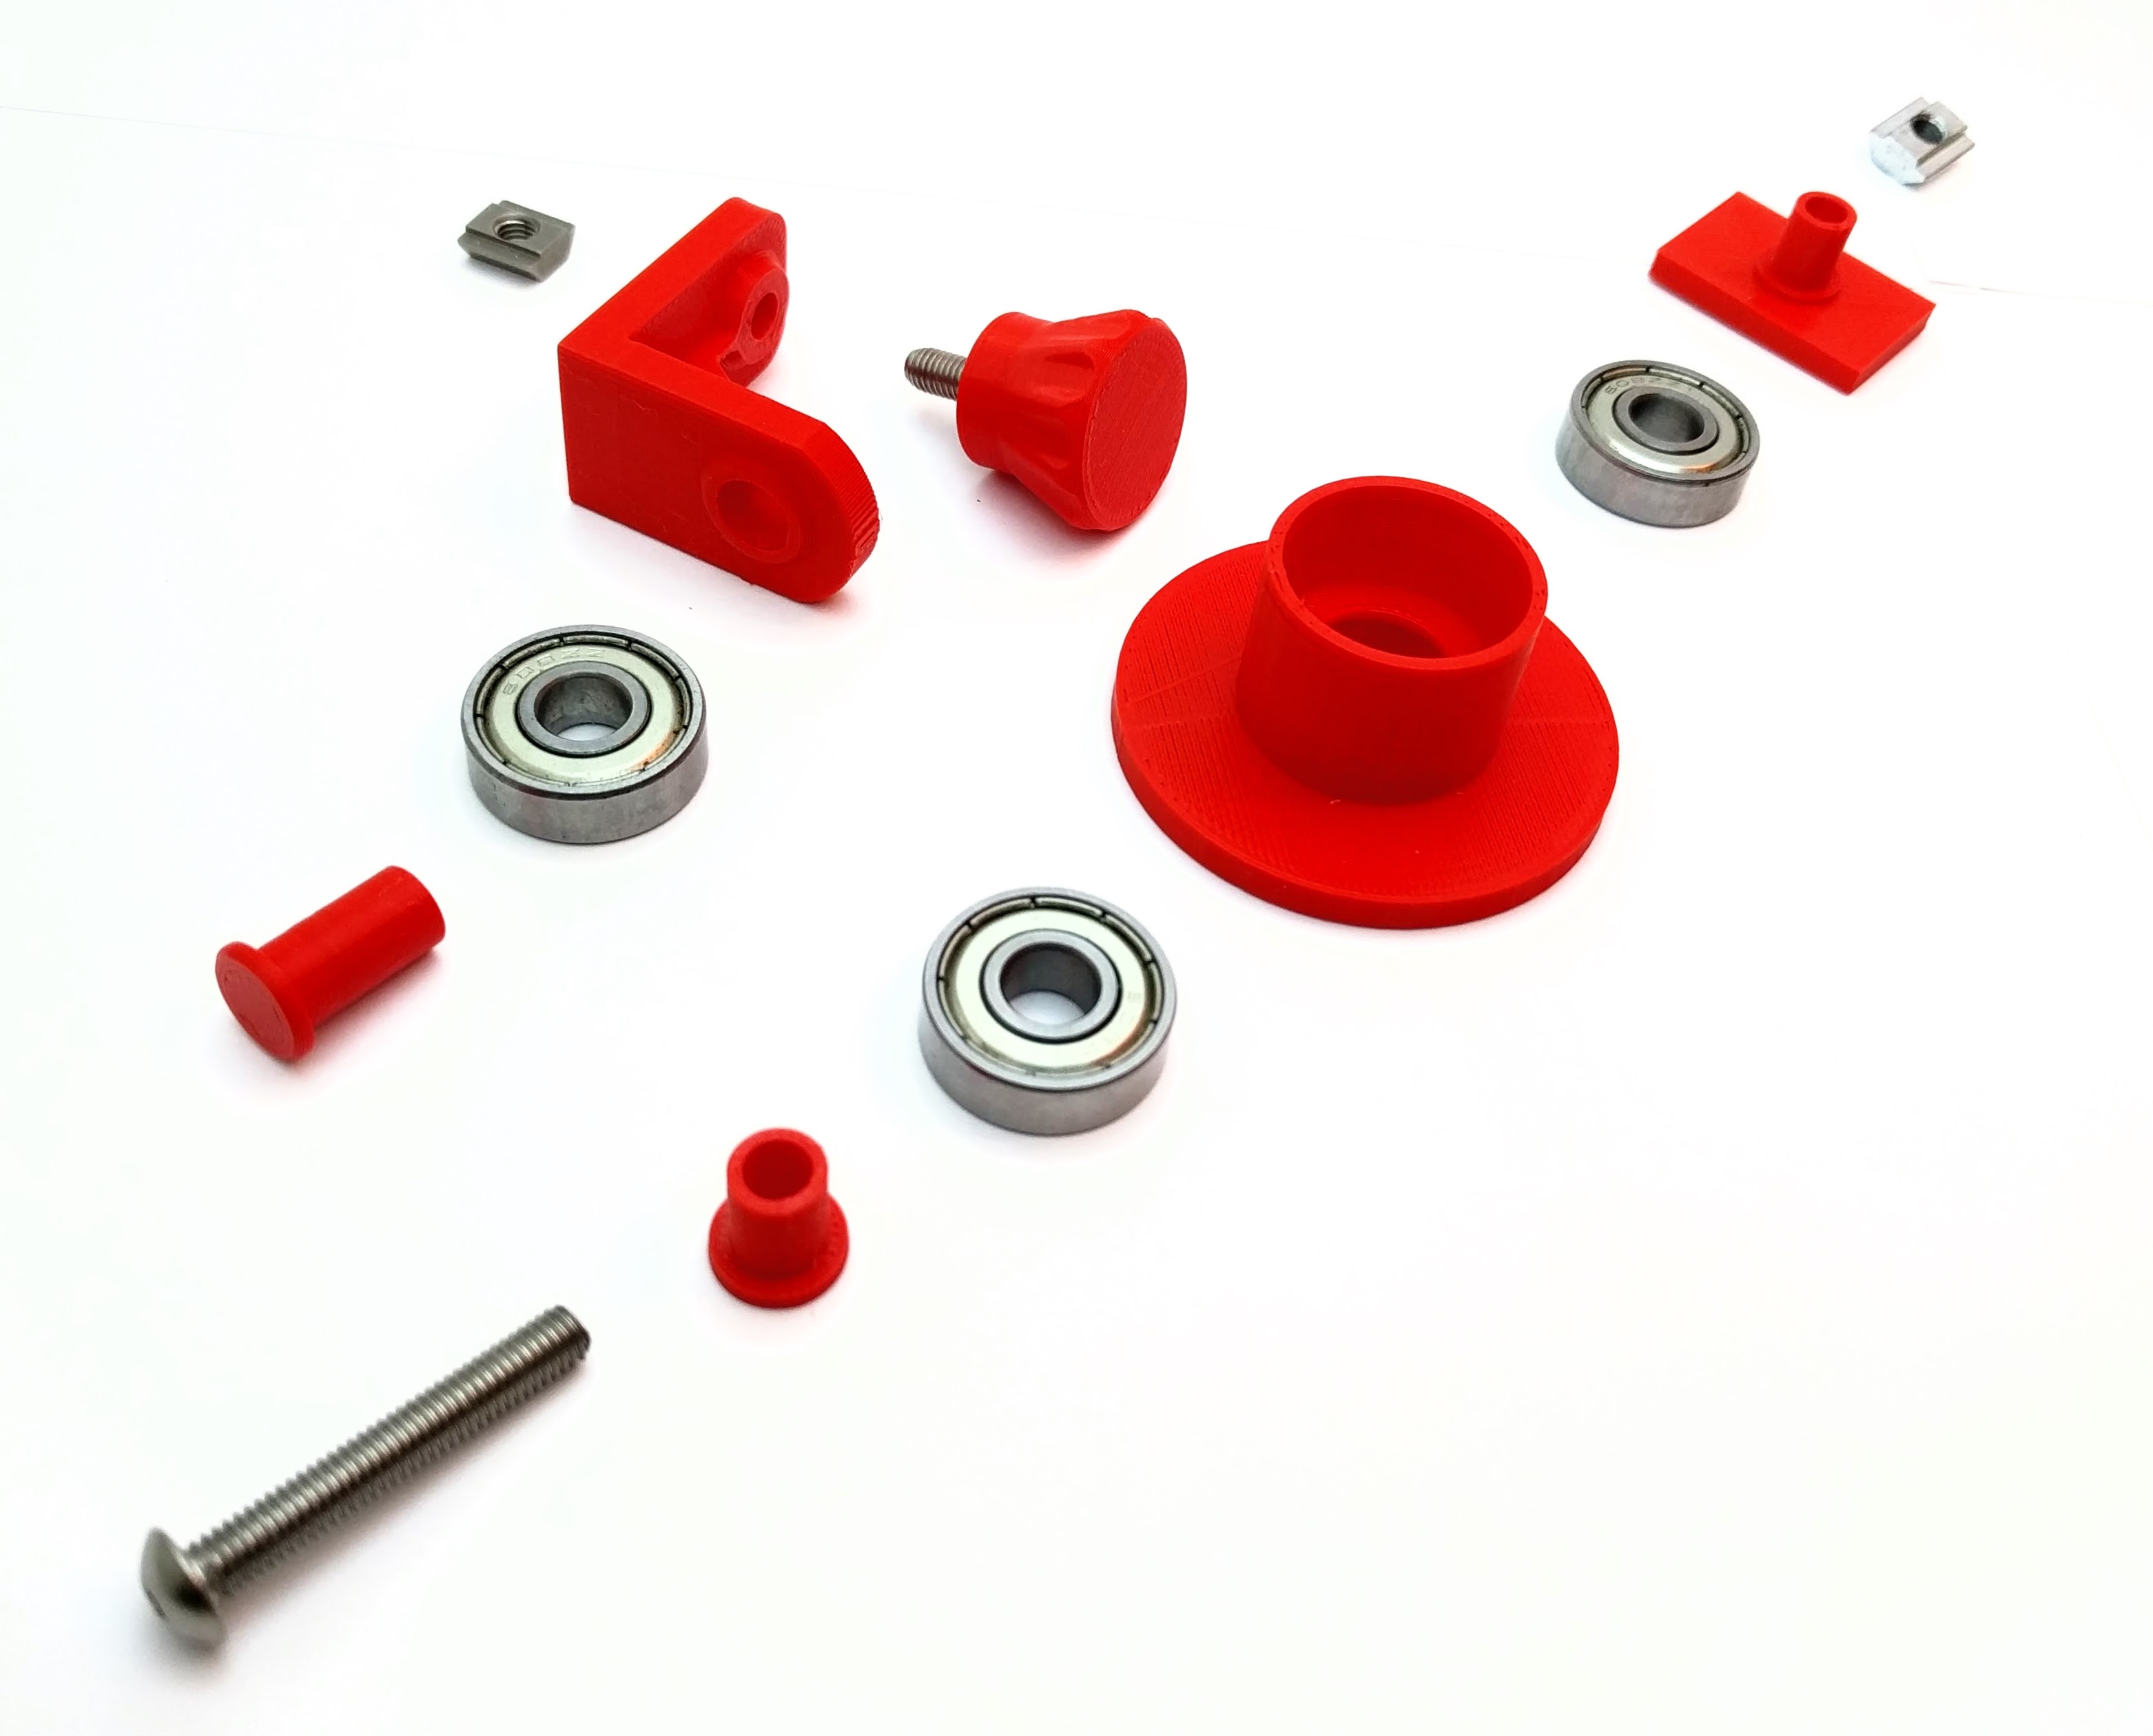 Mini 608 Bearing Low Friction Spool Holder (For Extrusion Mounting)